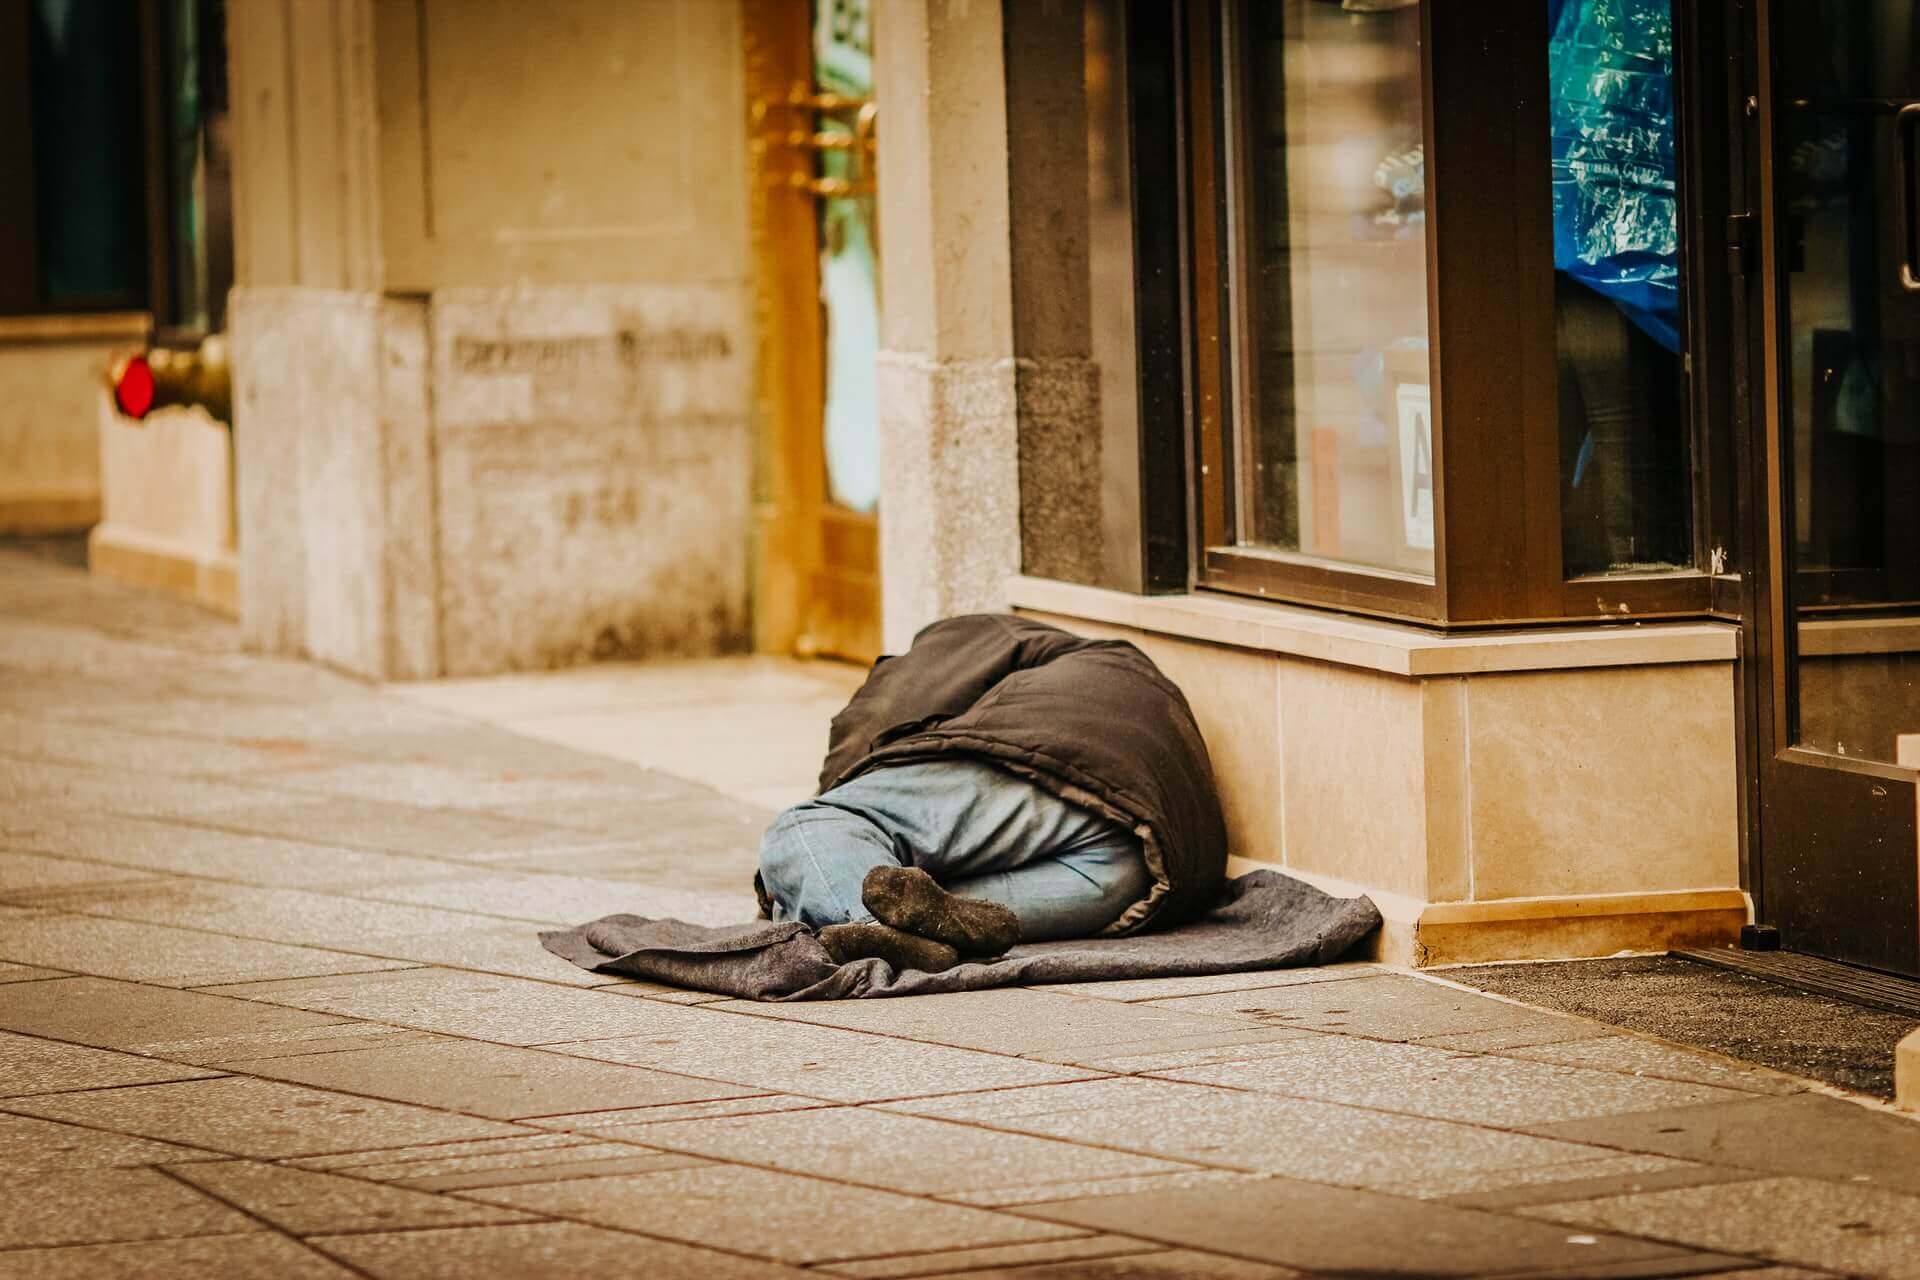 The Vagrancy Act will be repealed in the government’s new policing bill, spelling the end for the controversial 200-year-old law that makes rough sleeping and begging a criminal offence in England and Wales.